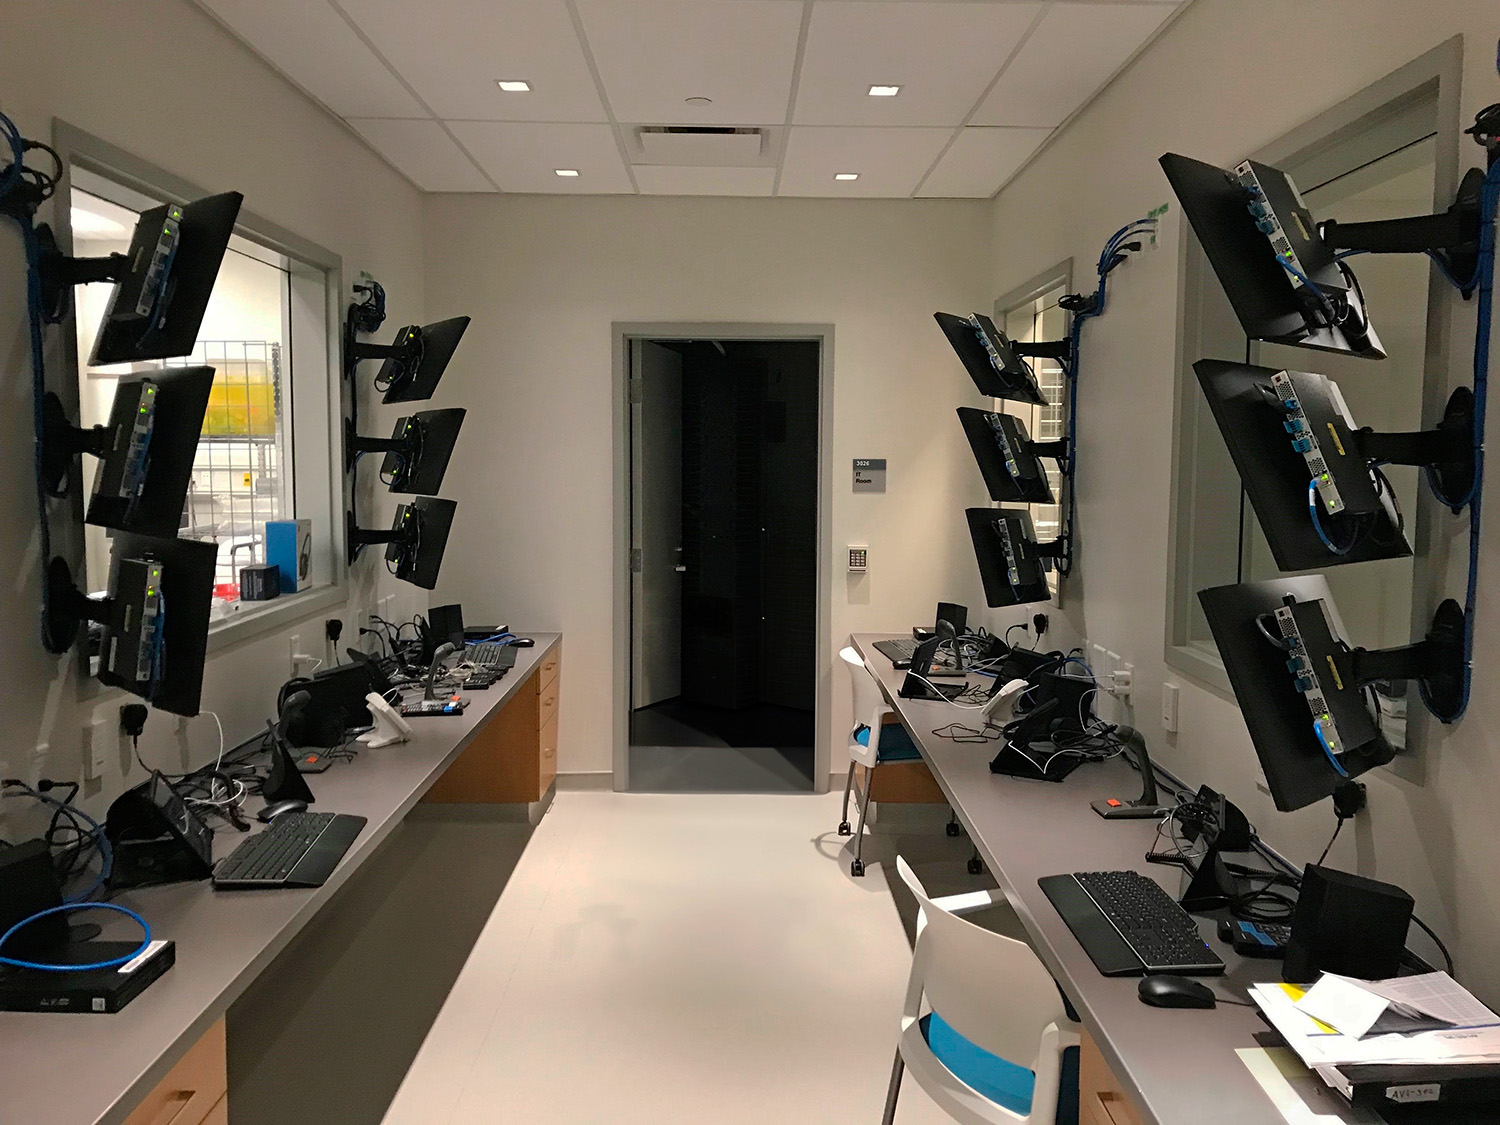 Some control rooms for the medium fidelity labs provide monitors rather than an observation window. The system operator and the lab confederate for that simulation communicate using headsets.